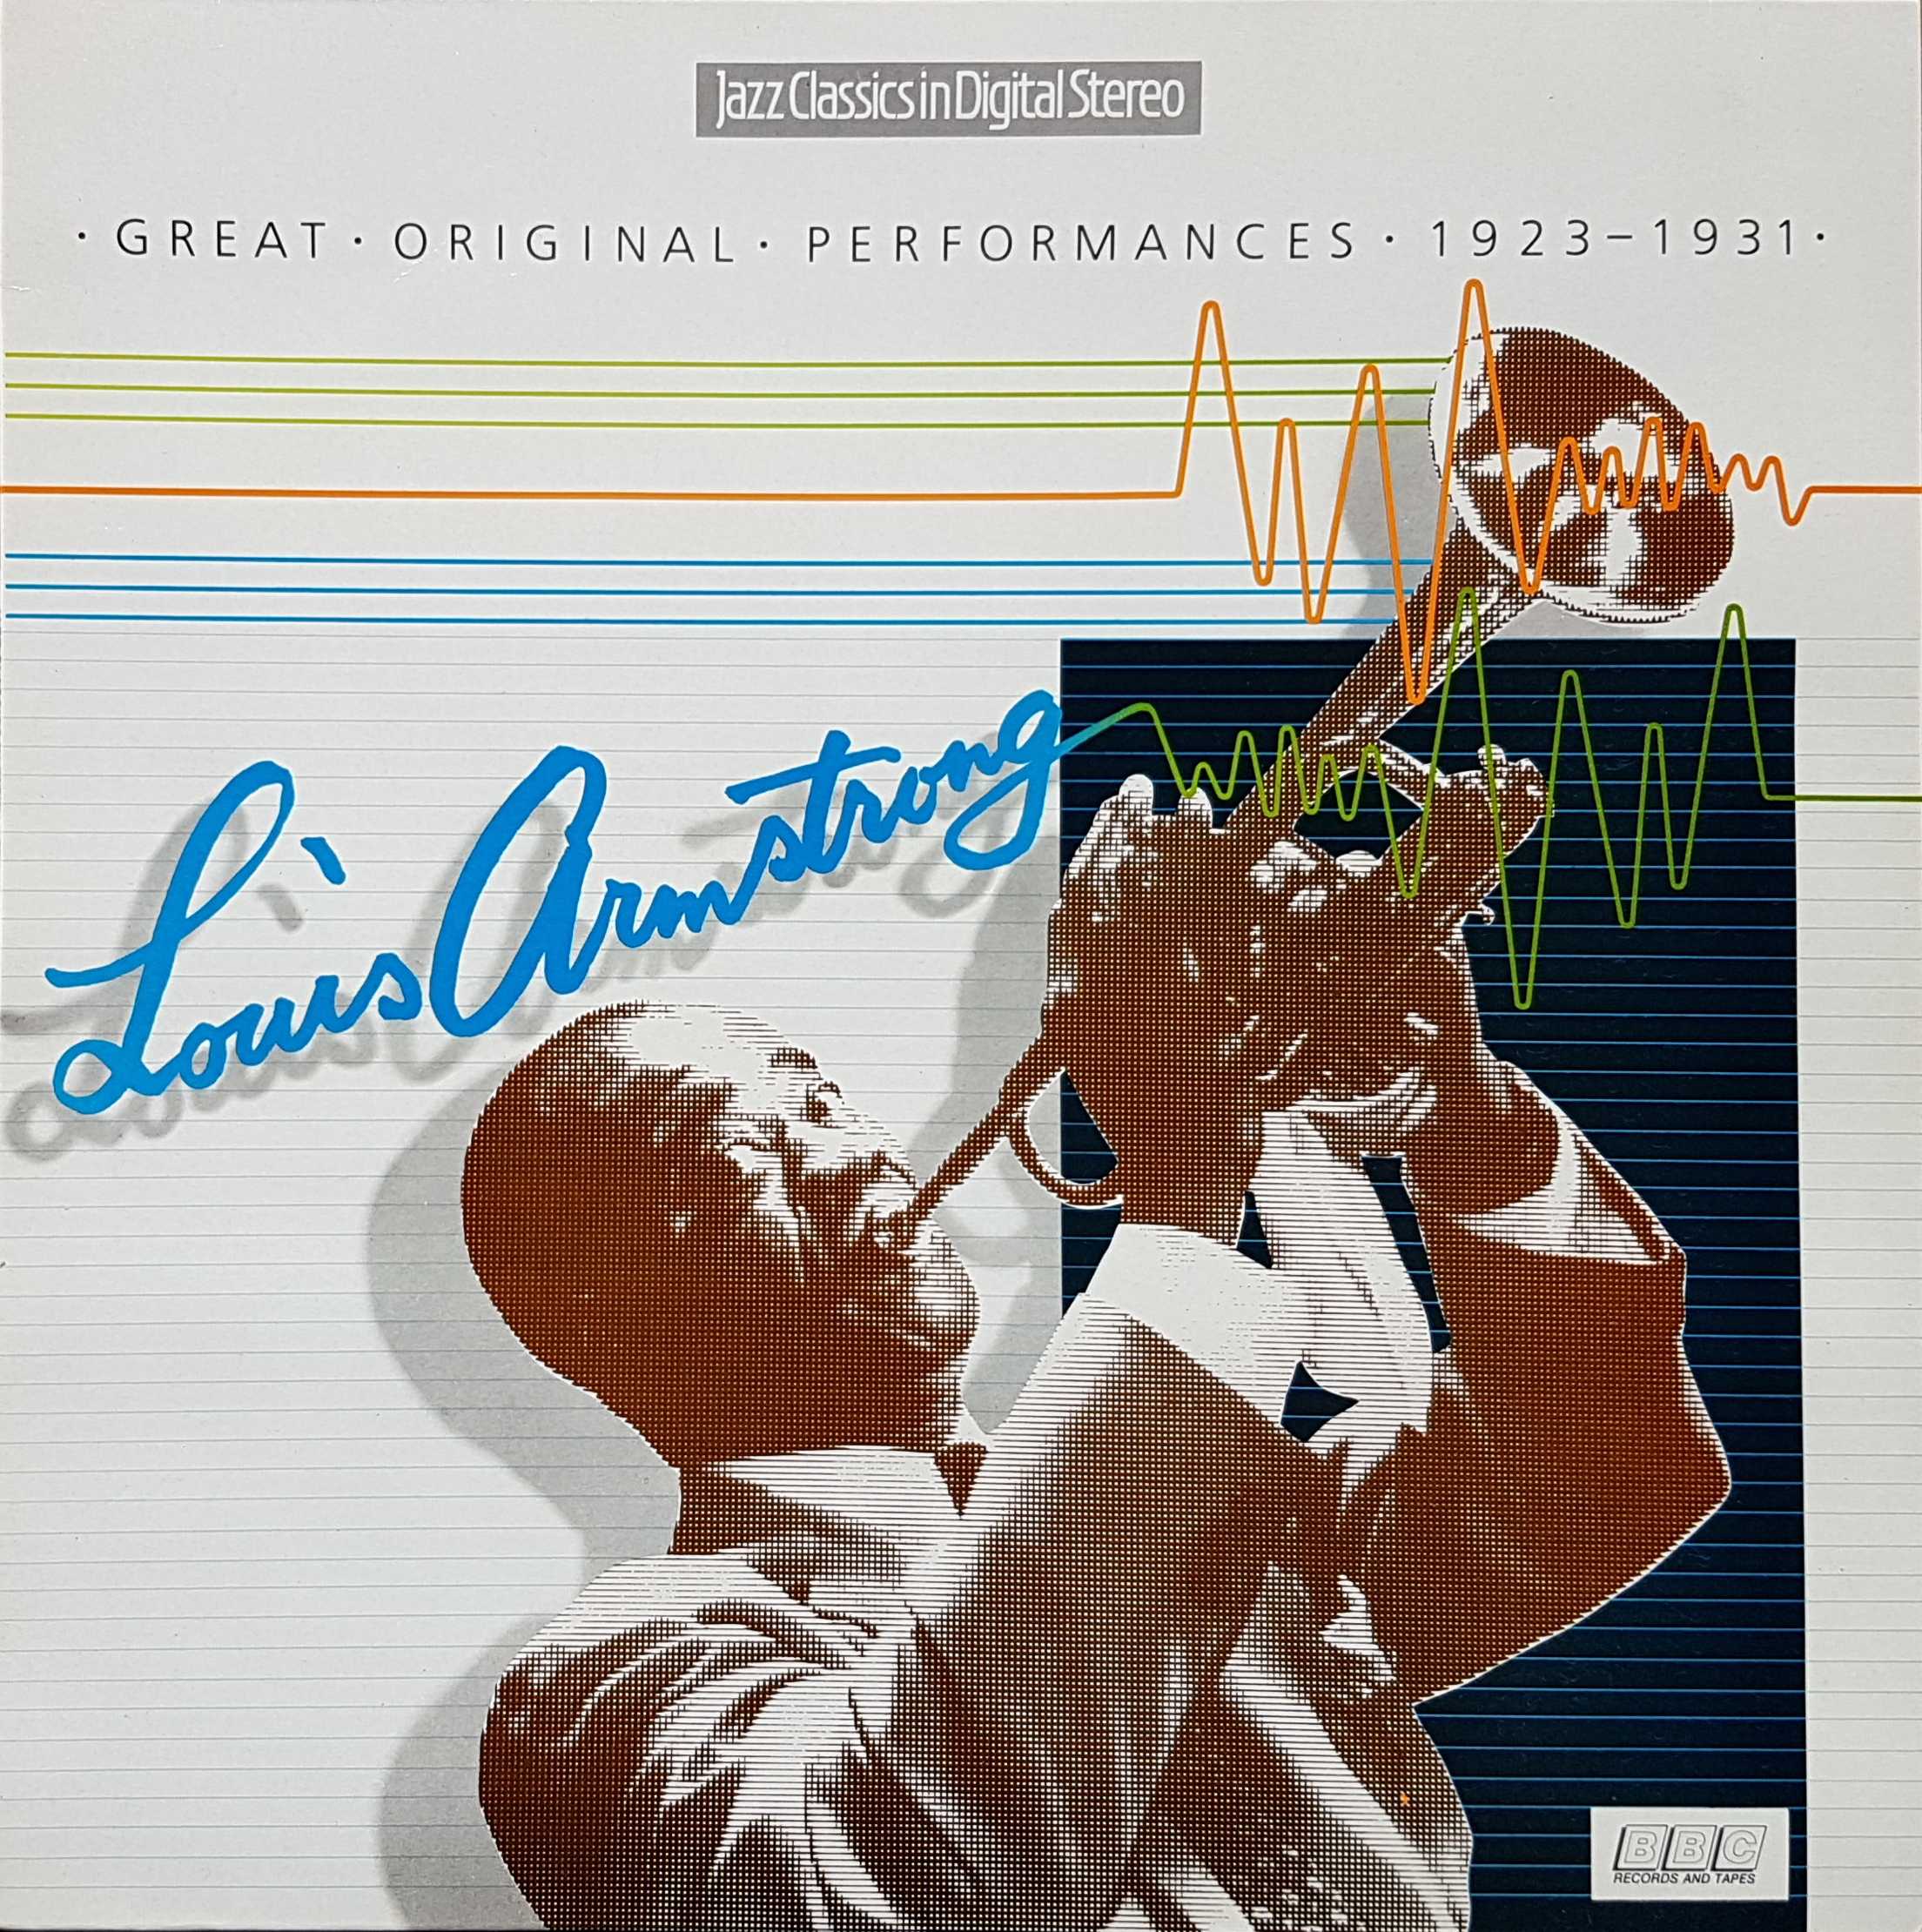 Picture of REB 597 Jazz Classics - Louis Armstrong by artist Louis Armstrong from the BBC albums - Records and Tapes library